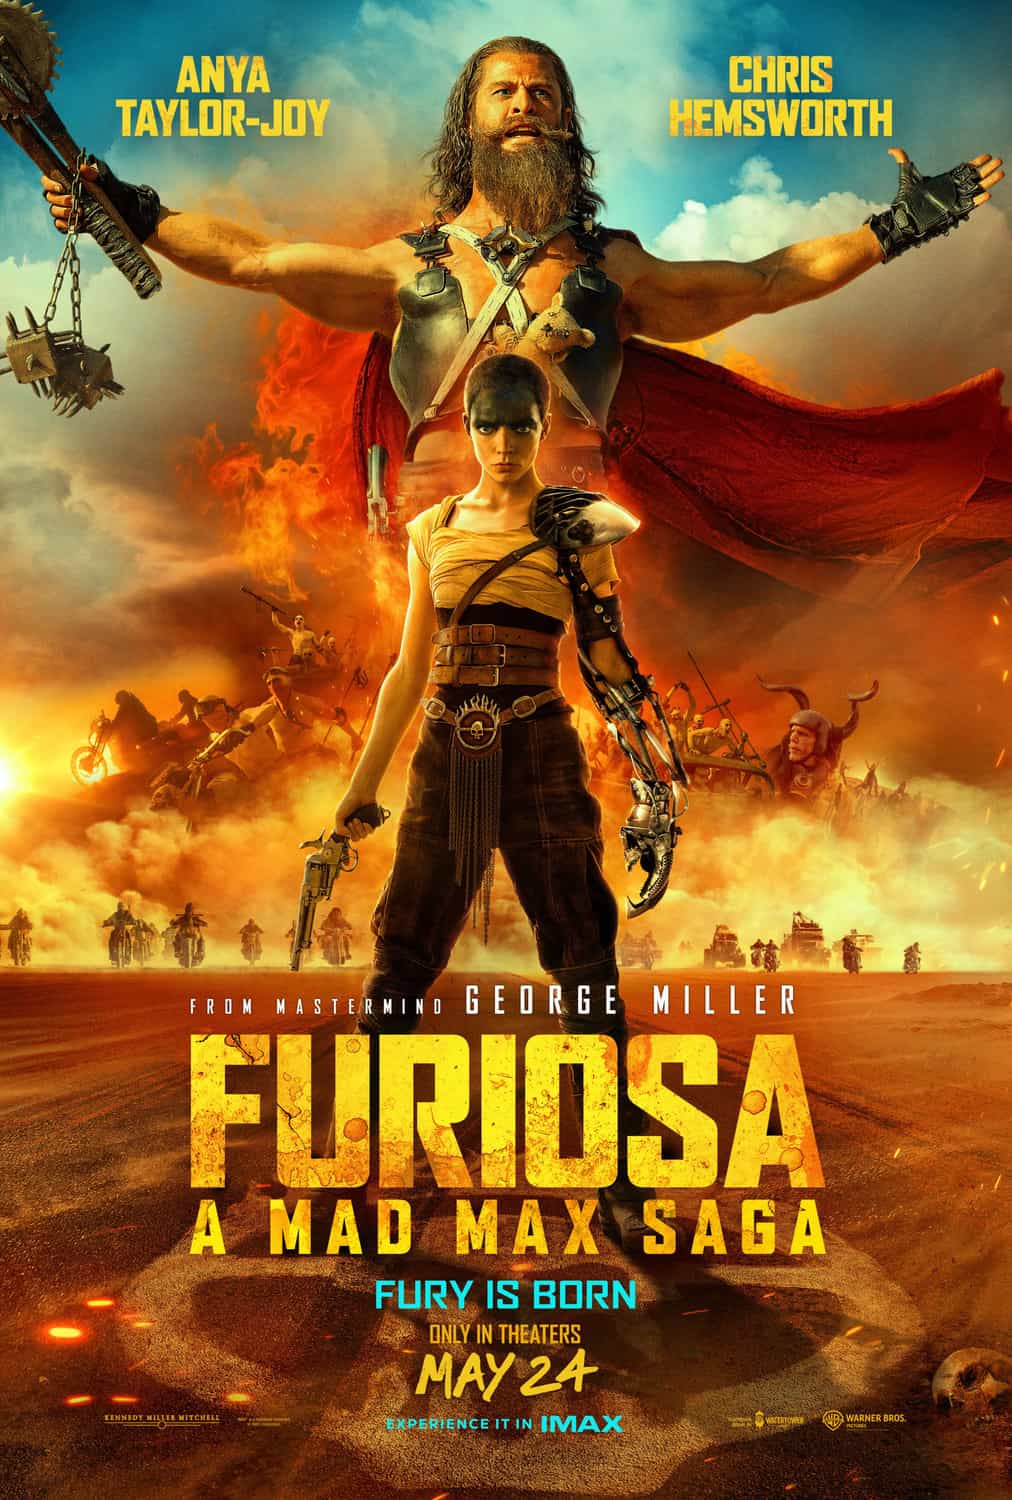 Check out the new trailer and motion poster for upcoming movie Furiosa which stars Anya Taylor-Joy and Chris Hemsworth - movie UK release date 24th May 2024 #furiosa